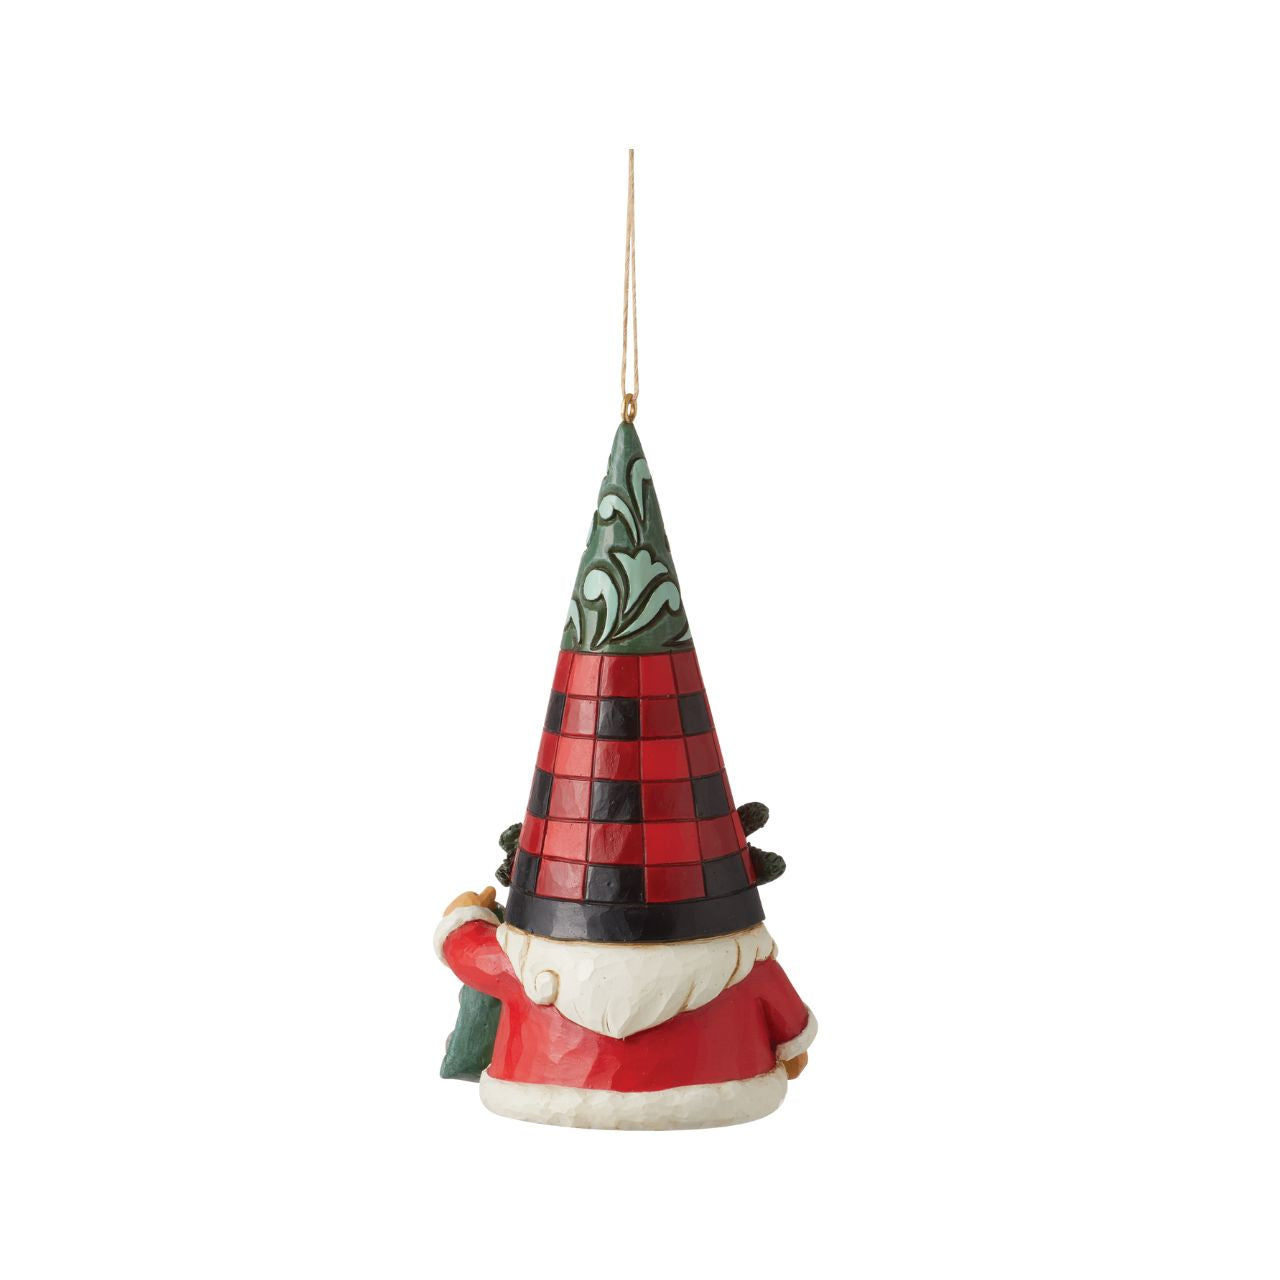 No one knows gnomes like Jim Shore! Creating yet another gnome, Jim has put a playful spin on Christmas. This Highland Glen holiday gnome ornament wears a plaid red hat topped in green rosemaling and belted in holly. He holds a ring of jingle bells.